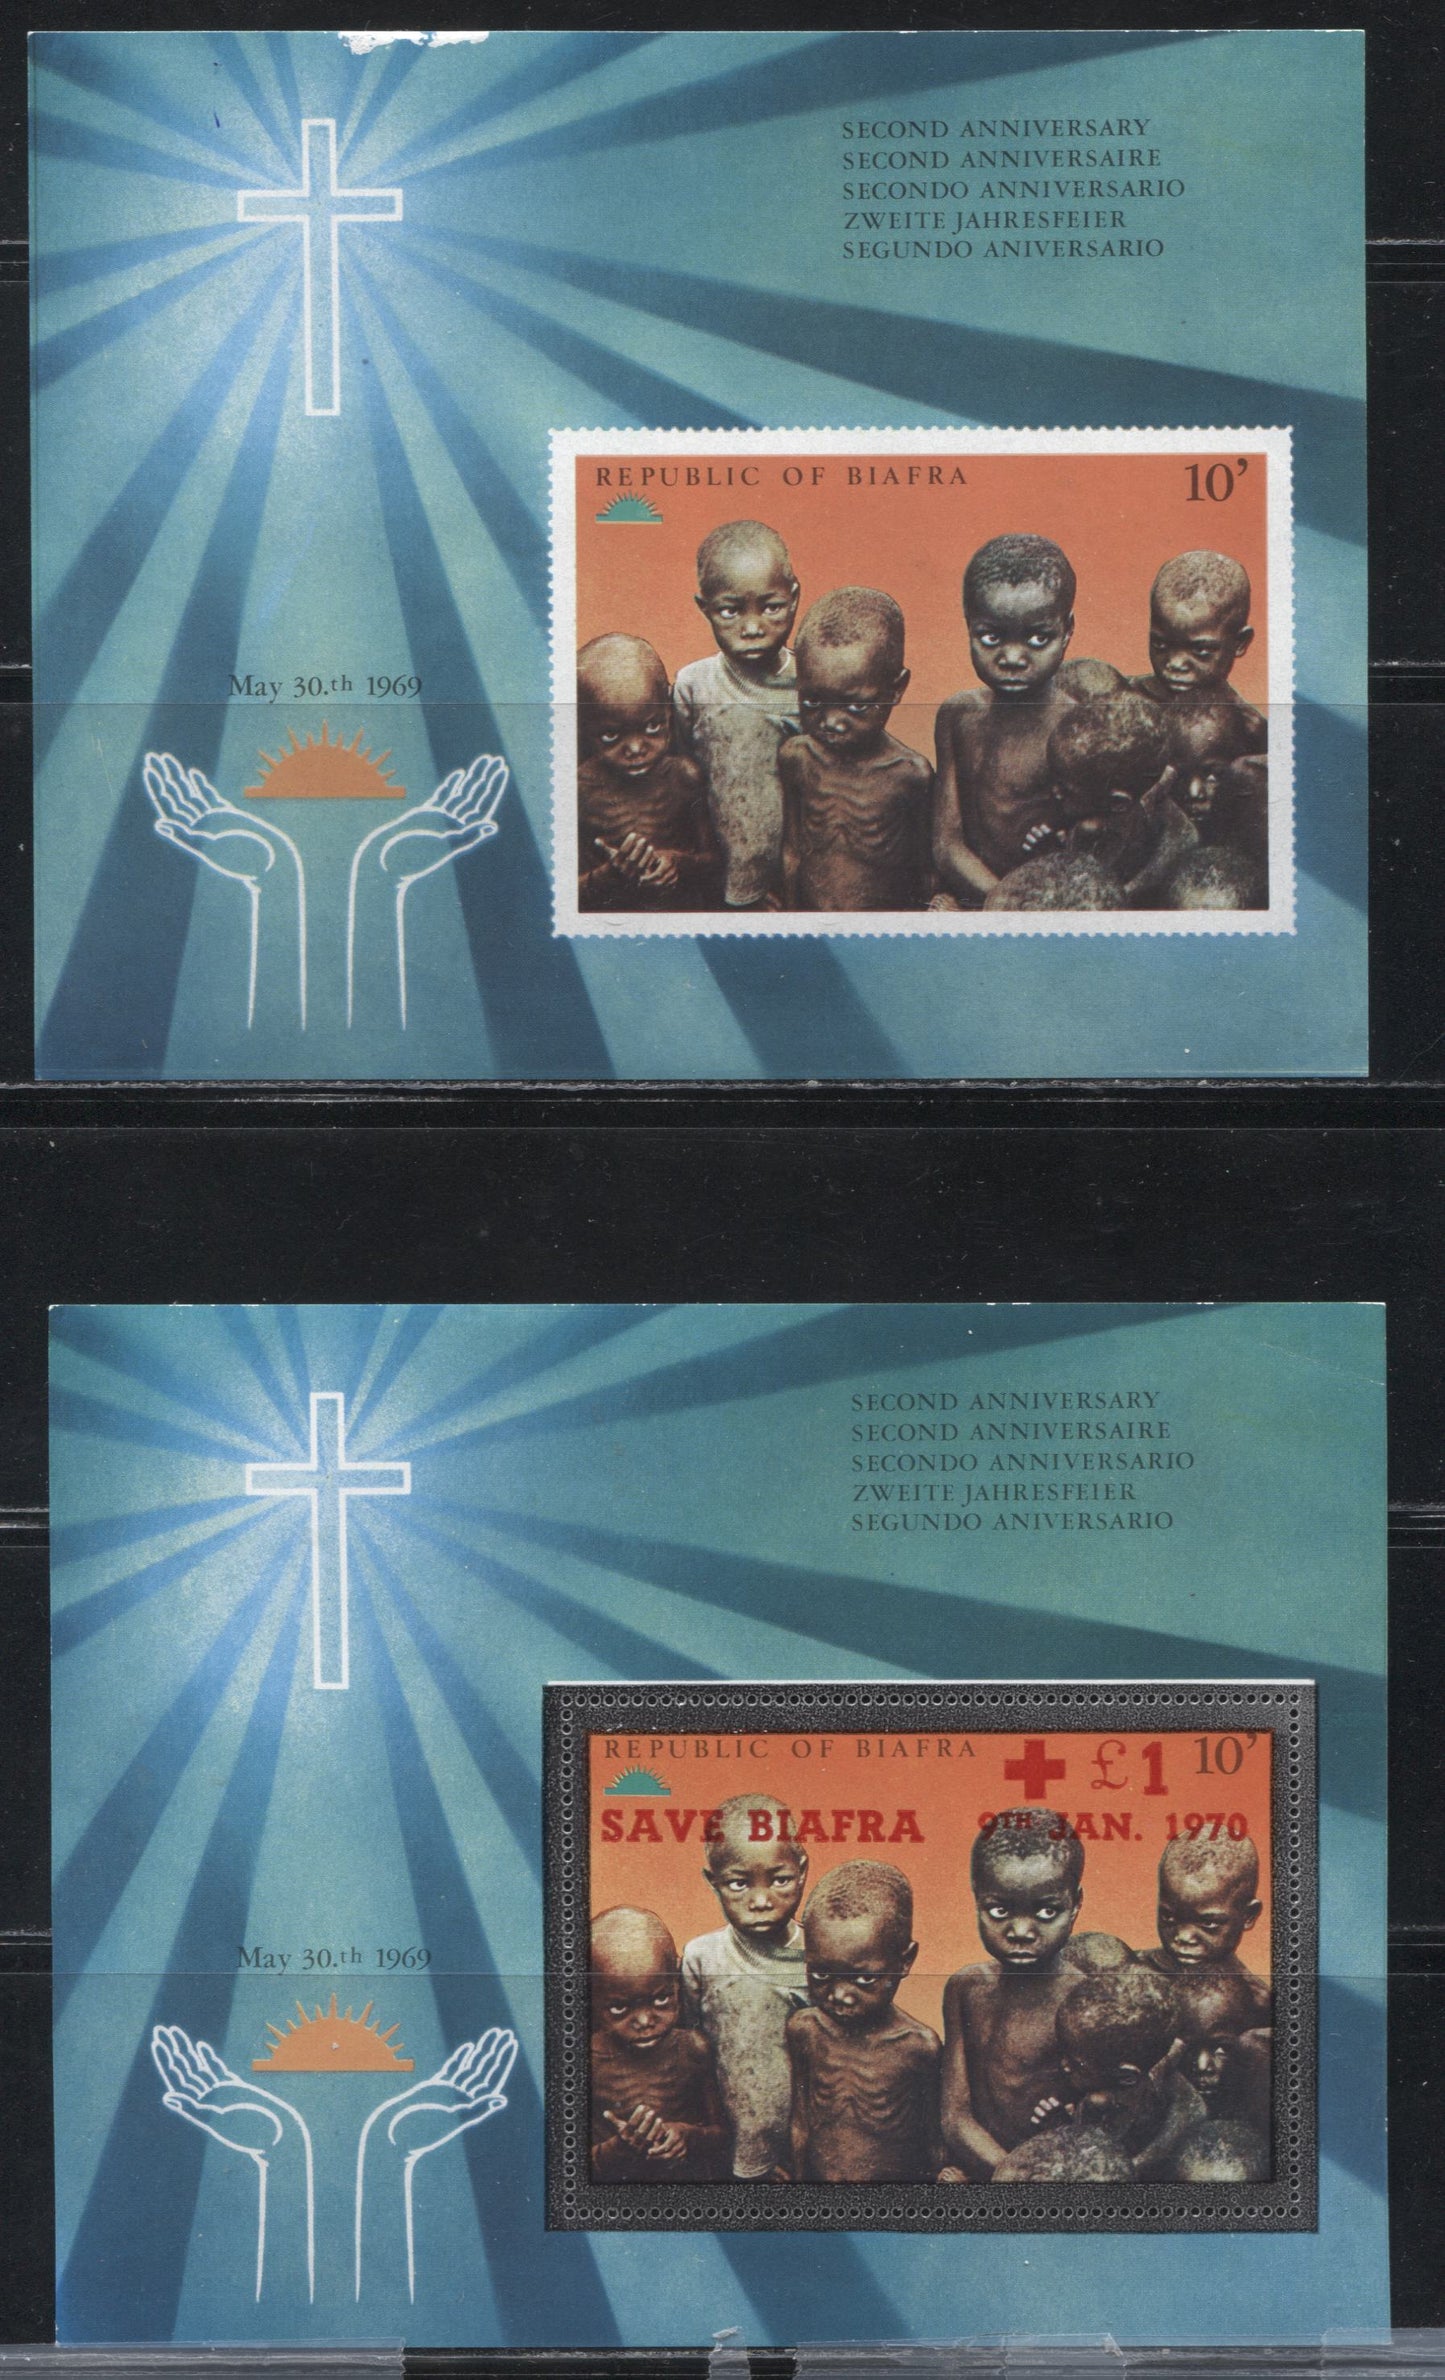 Lot 264 Nigeria - Biafra Unlisted 1969 Second Anniversary of Independence 4 Perf and Imperf Souvenir Sheets With and Without "Save Biafra" Overprints, VFNH and Fine NH